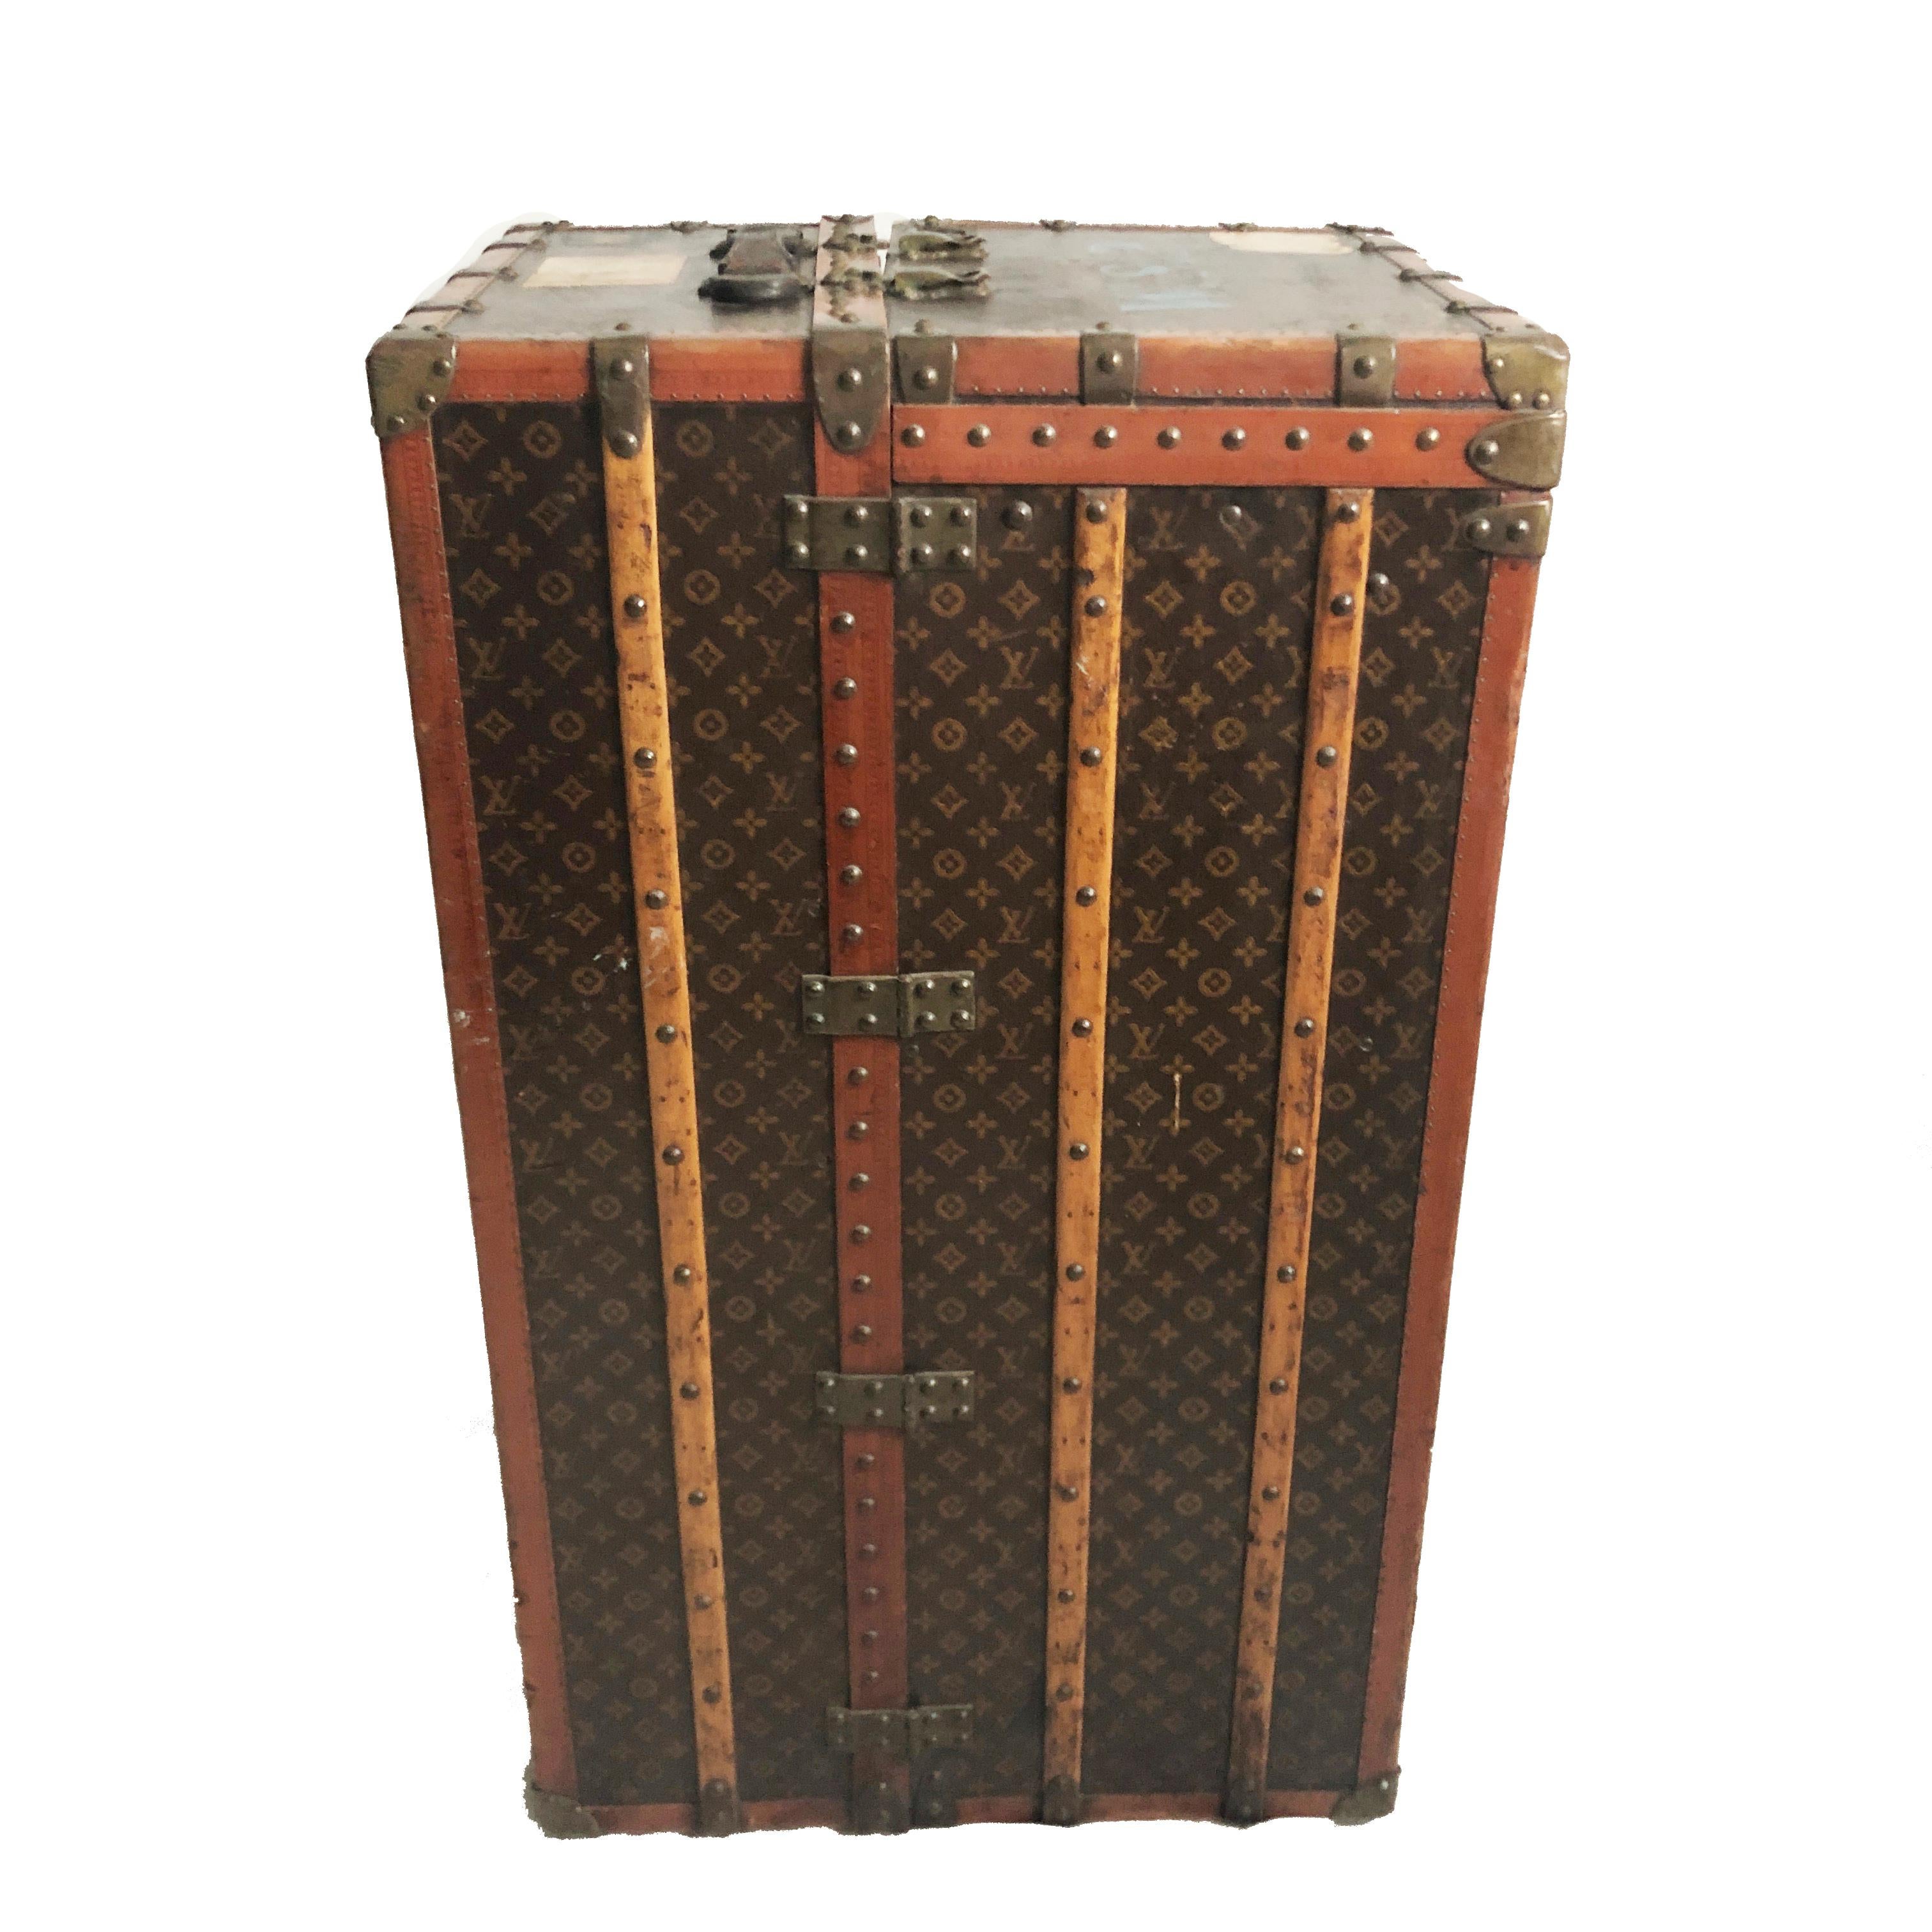 Louis Vuitton Large Wardrobe Steamer Trunk Monogram Travel Case Early 20th C  For Sale 4